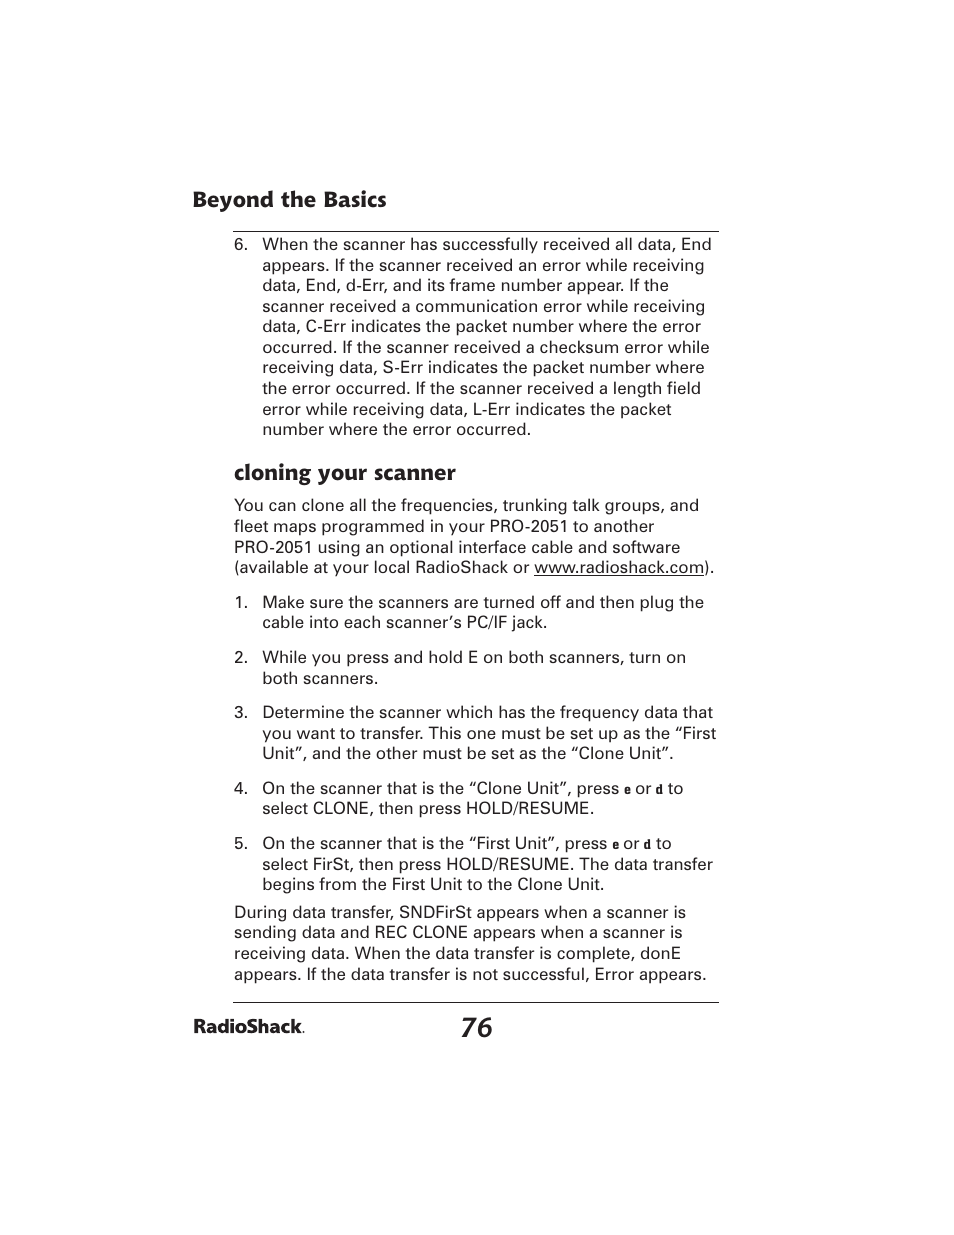 Beyond the basics, Cloning your scanner | Radio Shack PRO-2051 User Manual  | Page 76 / 84